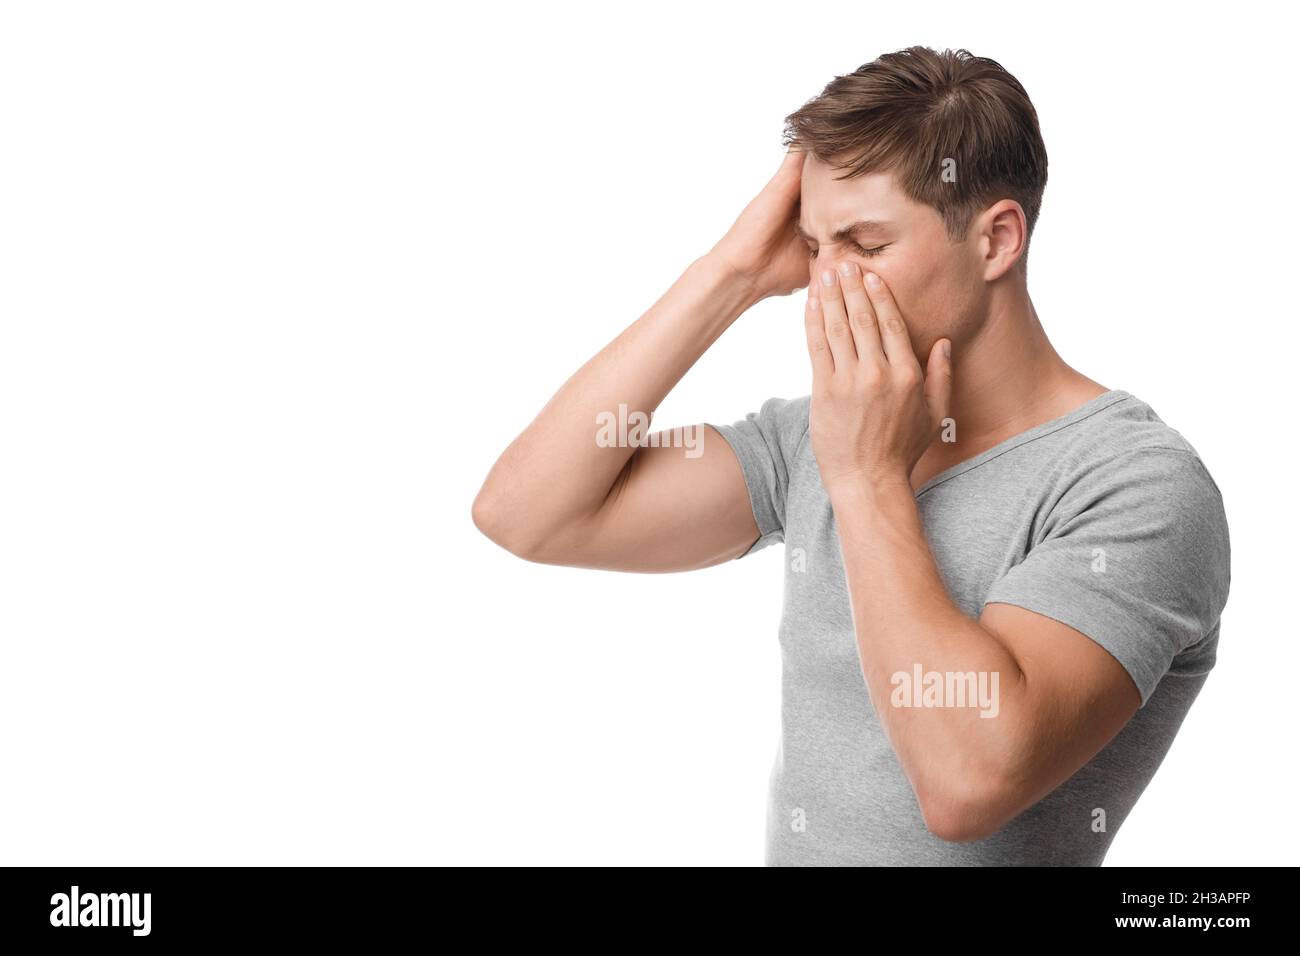 Upset young caucasian man suffering from headache, runny nose, feeling unwell Stock Photo